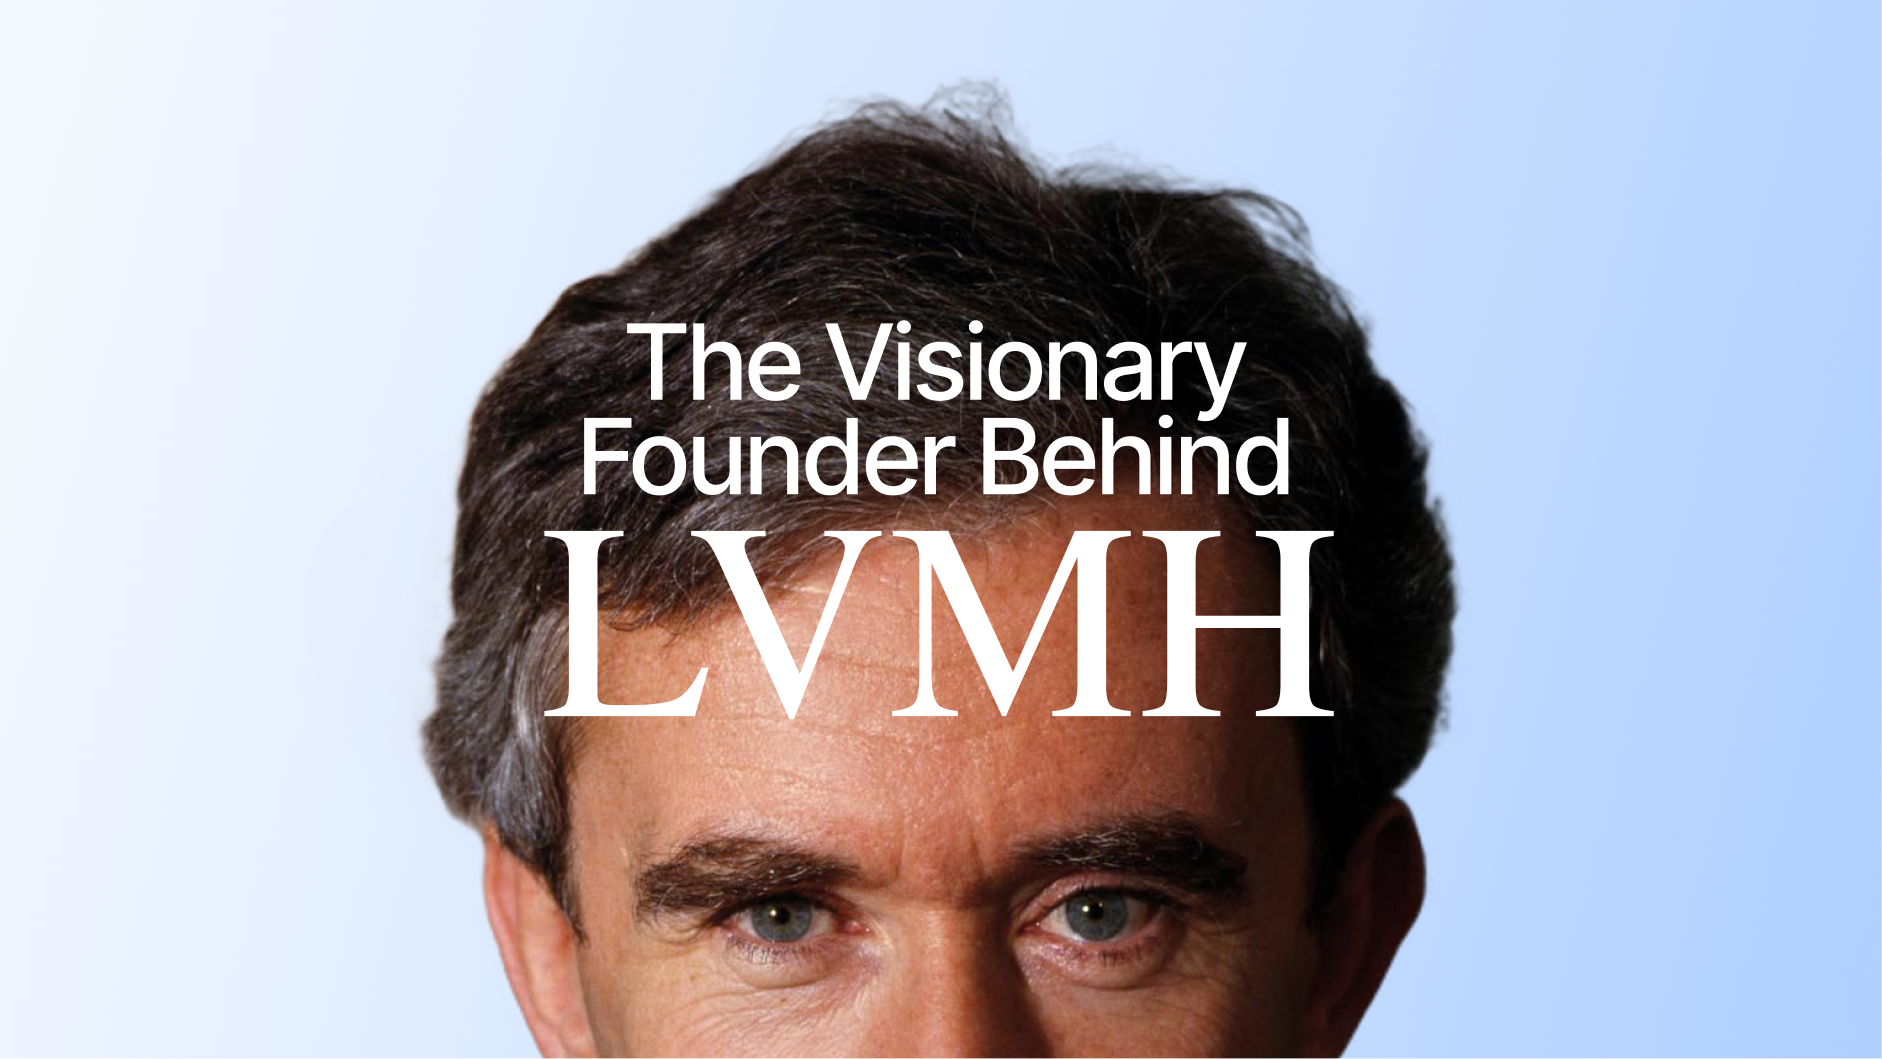 LVMH has used almost every merger and acquisition process to